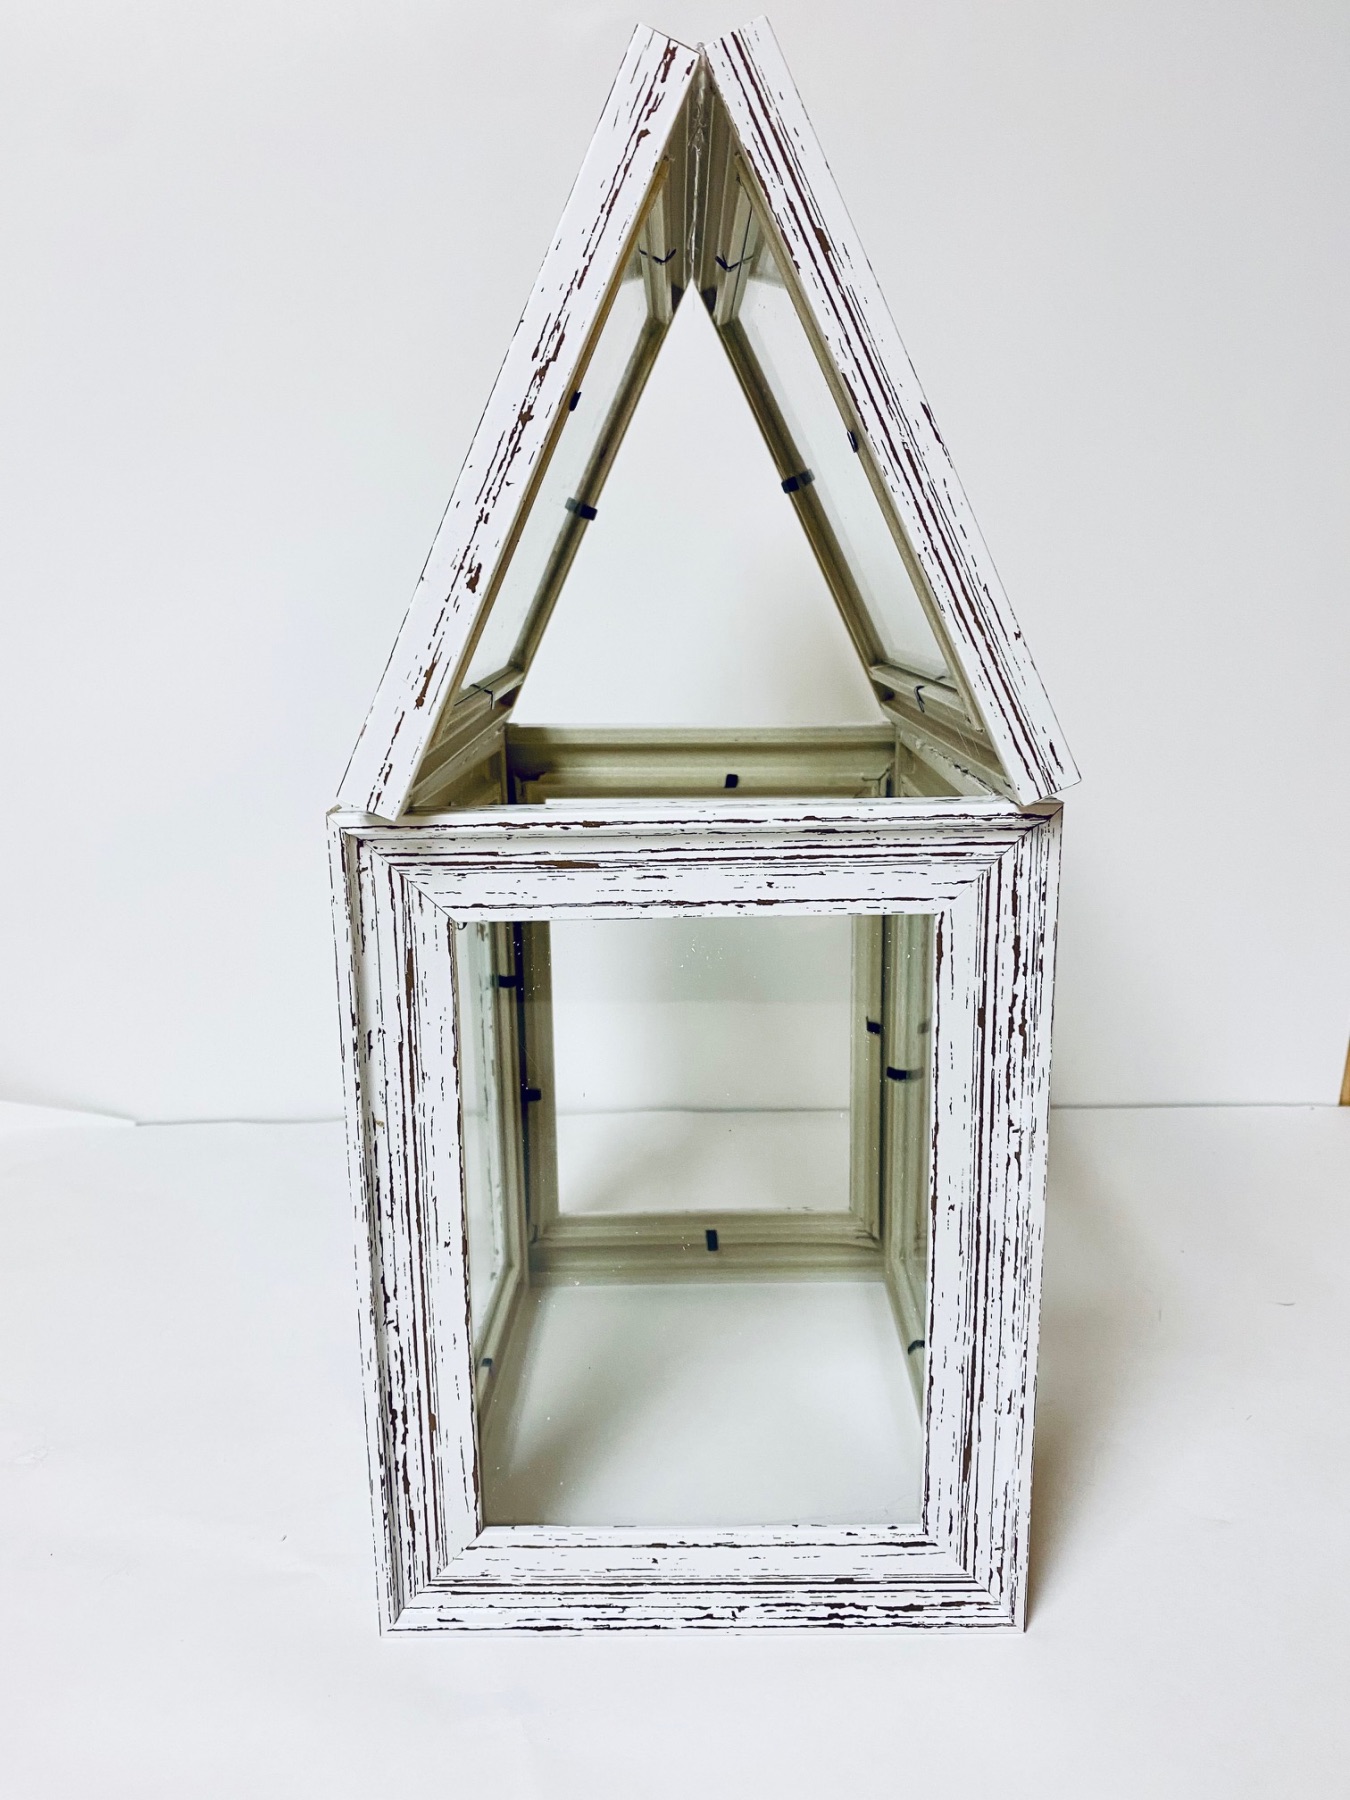 attach the frames to make a greenhouse roof